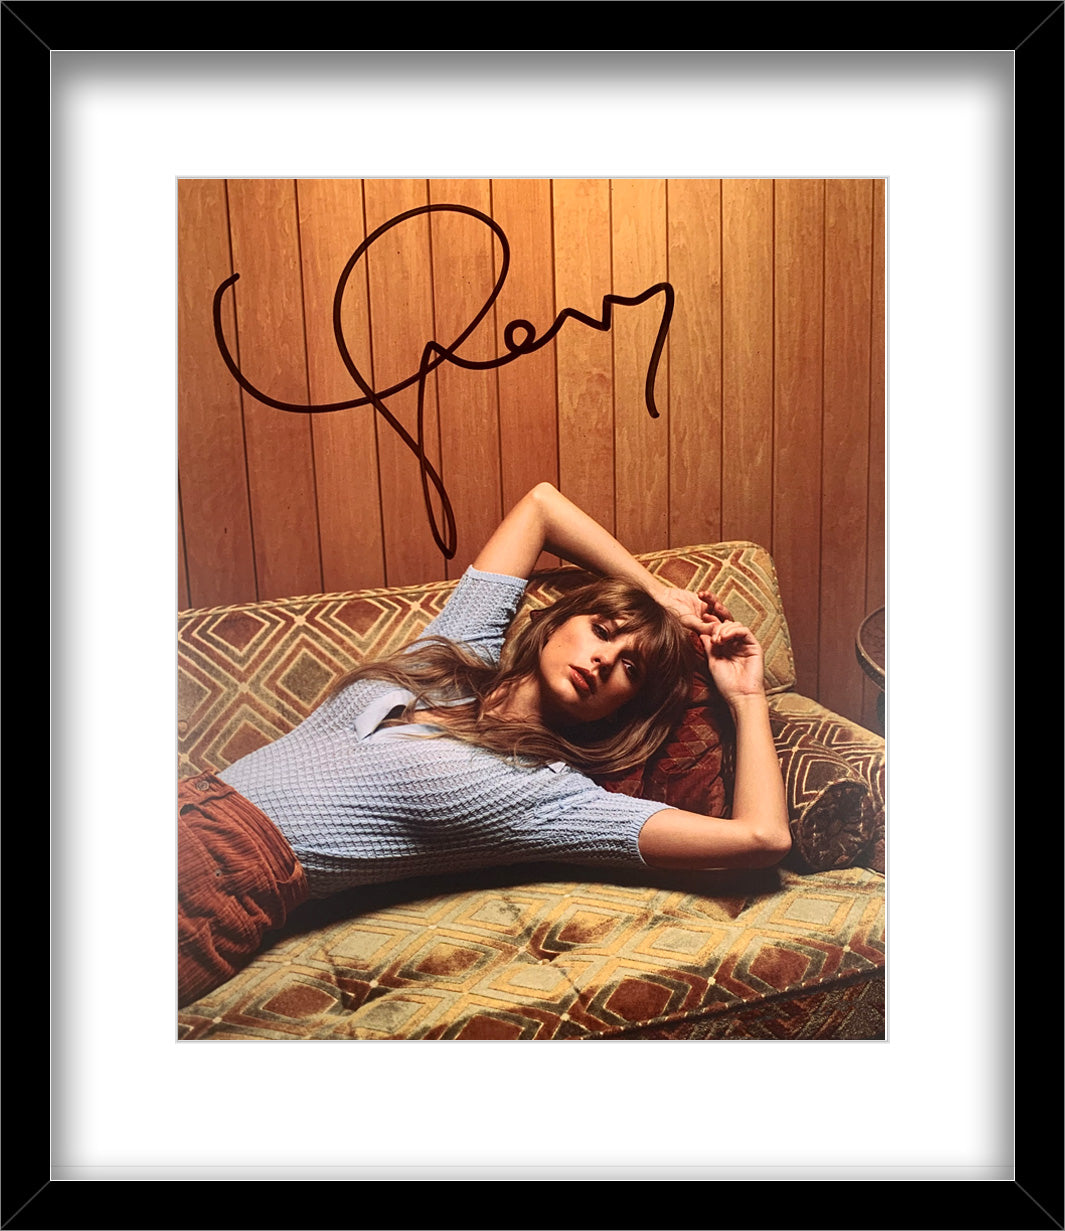 Taylor Swift Signed 8x10 Photograph.